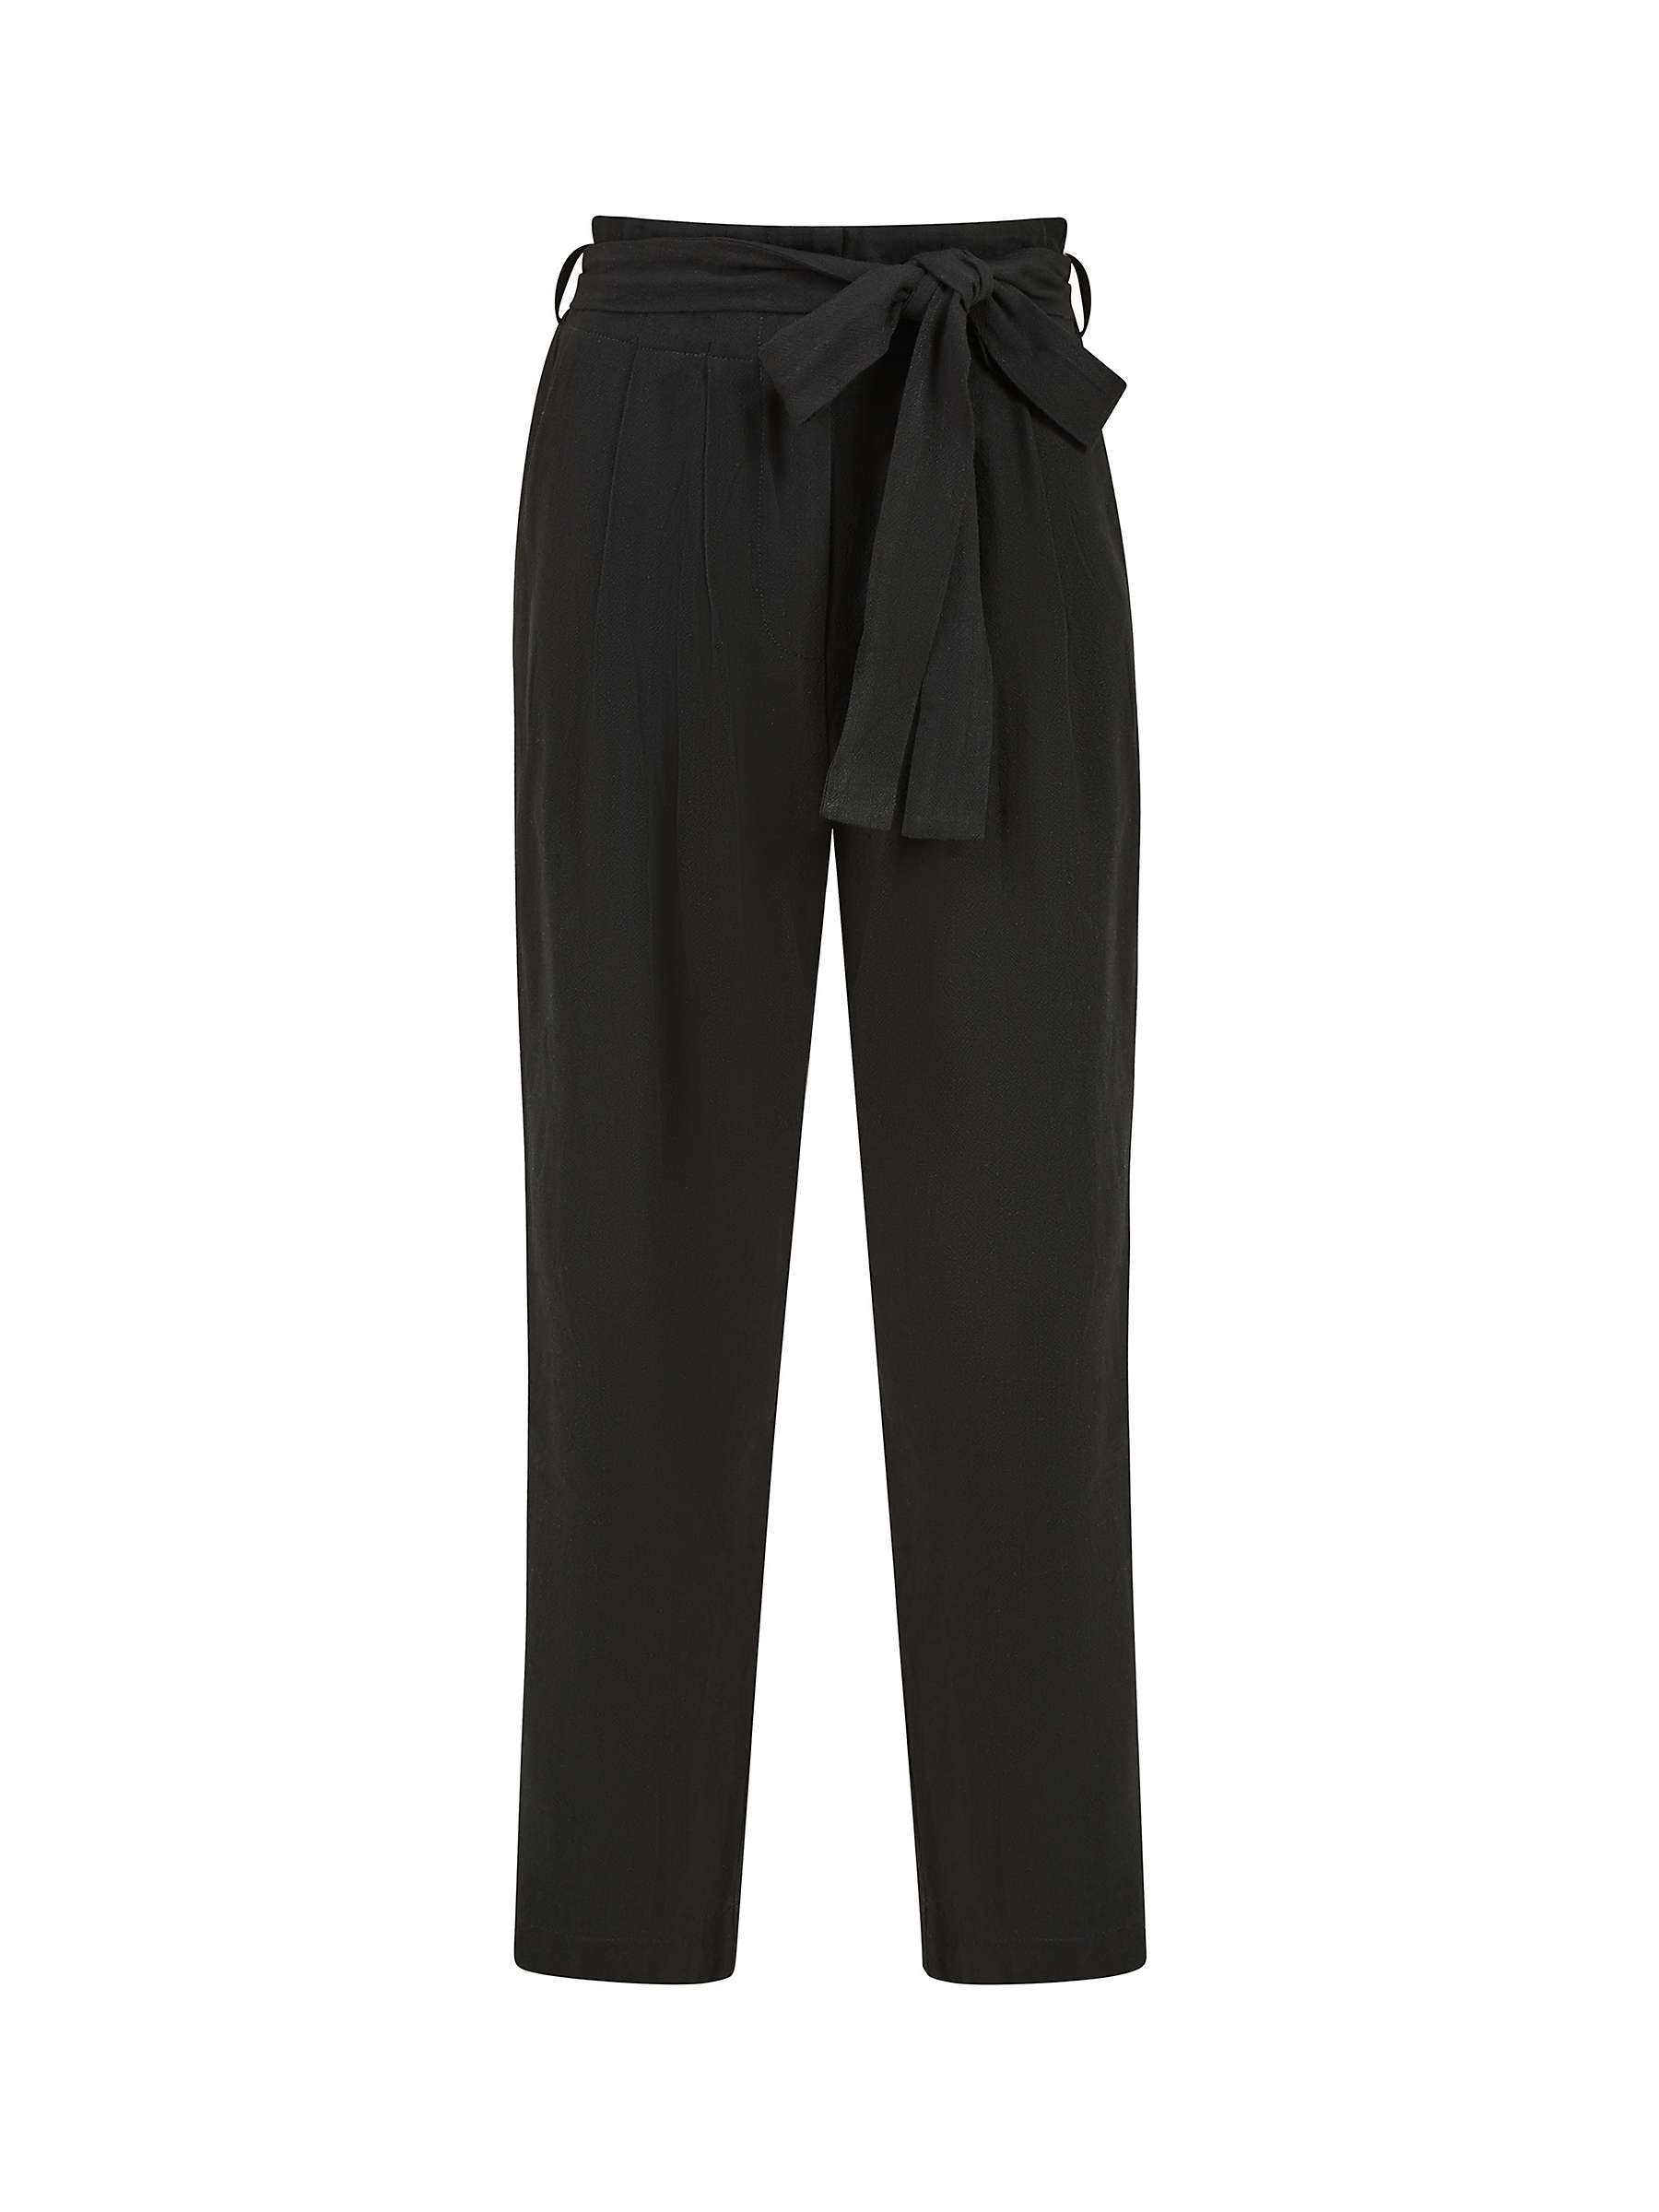 Buy Yumi Tailored Linen Blend Cropped Trousers, Black Online at johnlewis.com